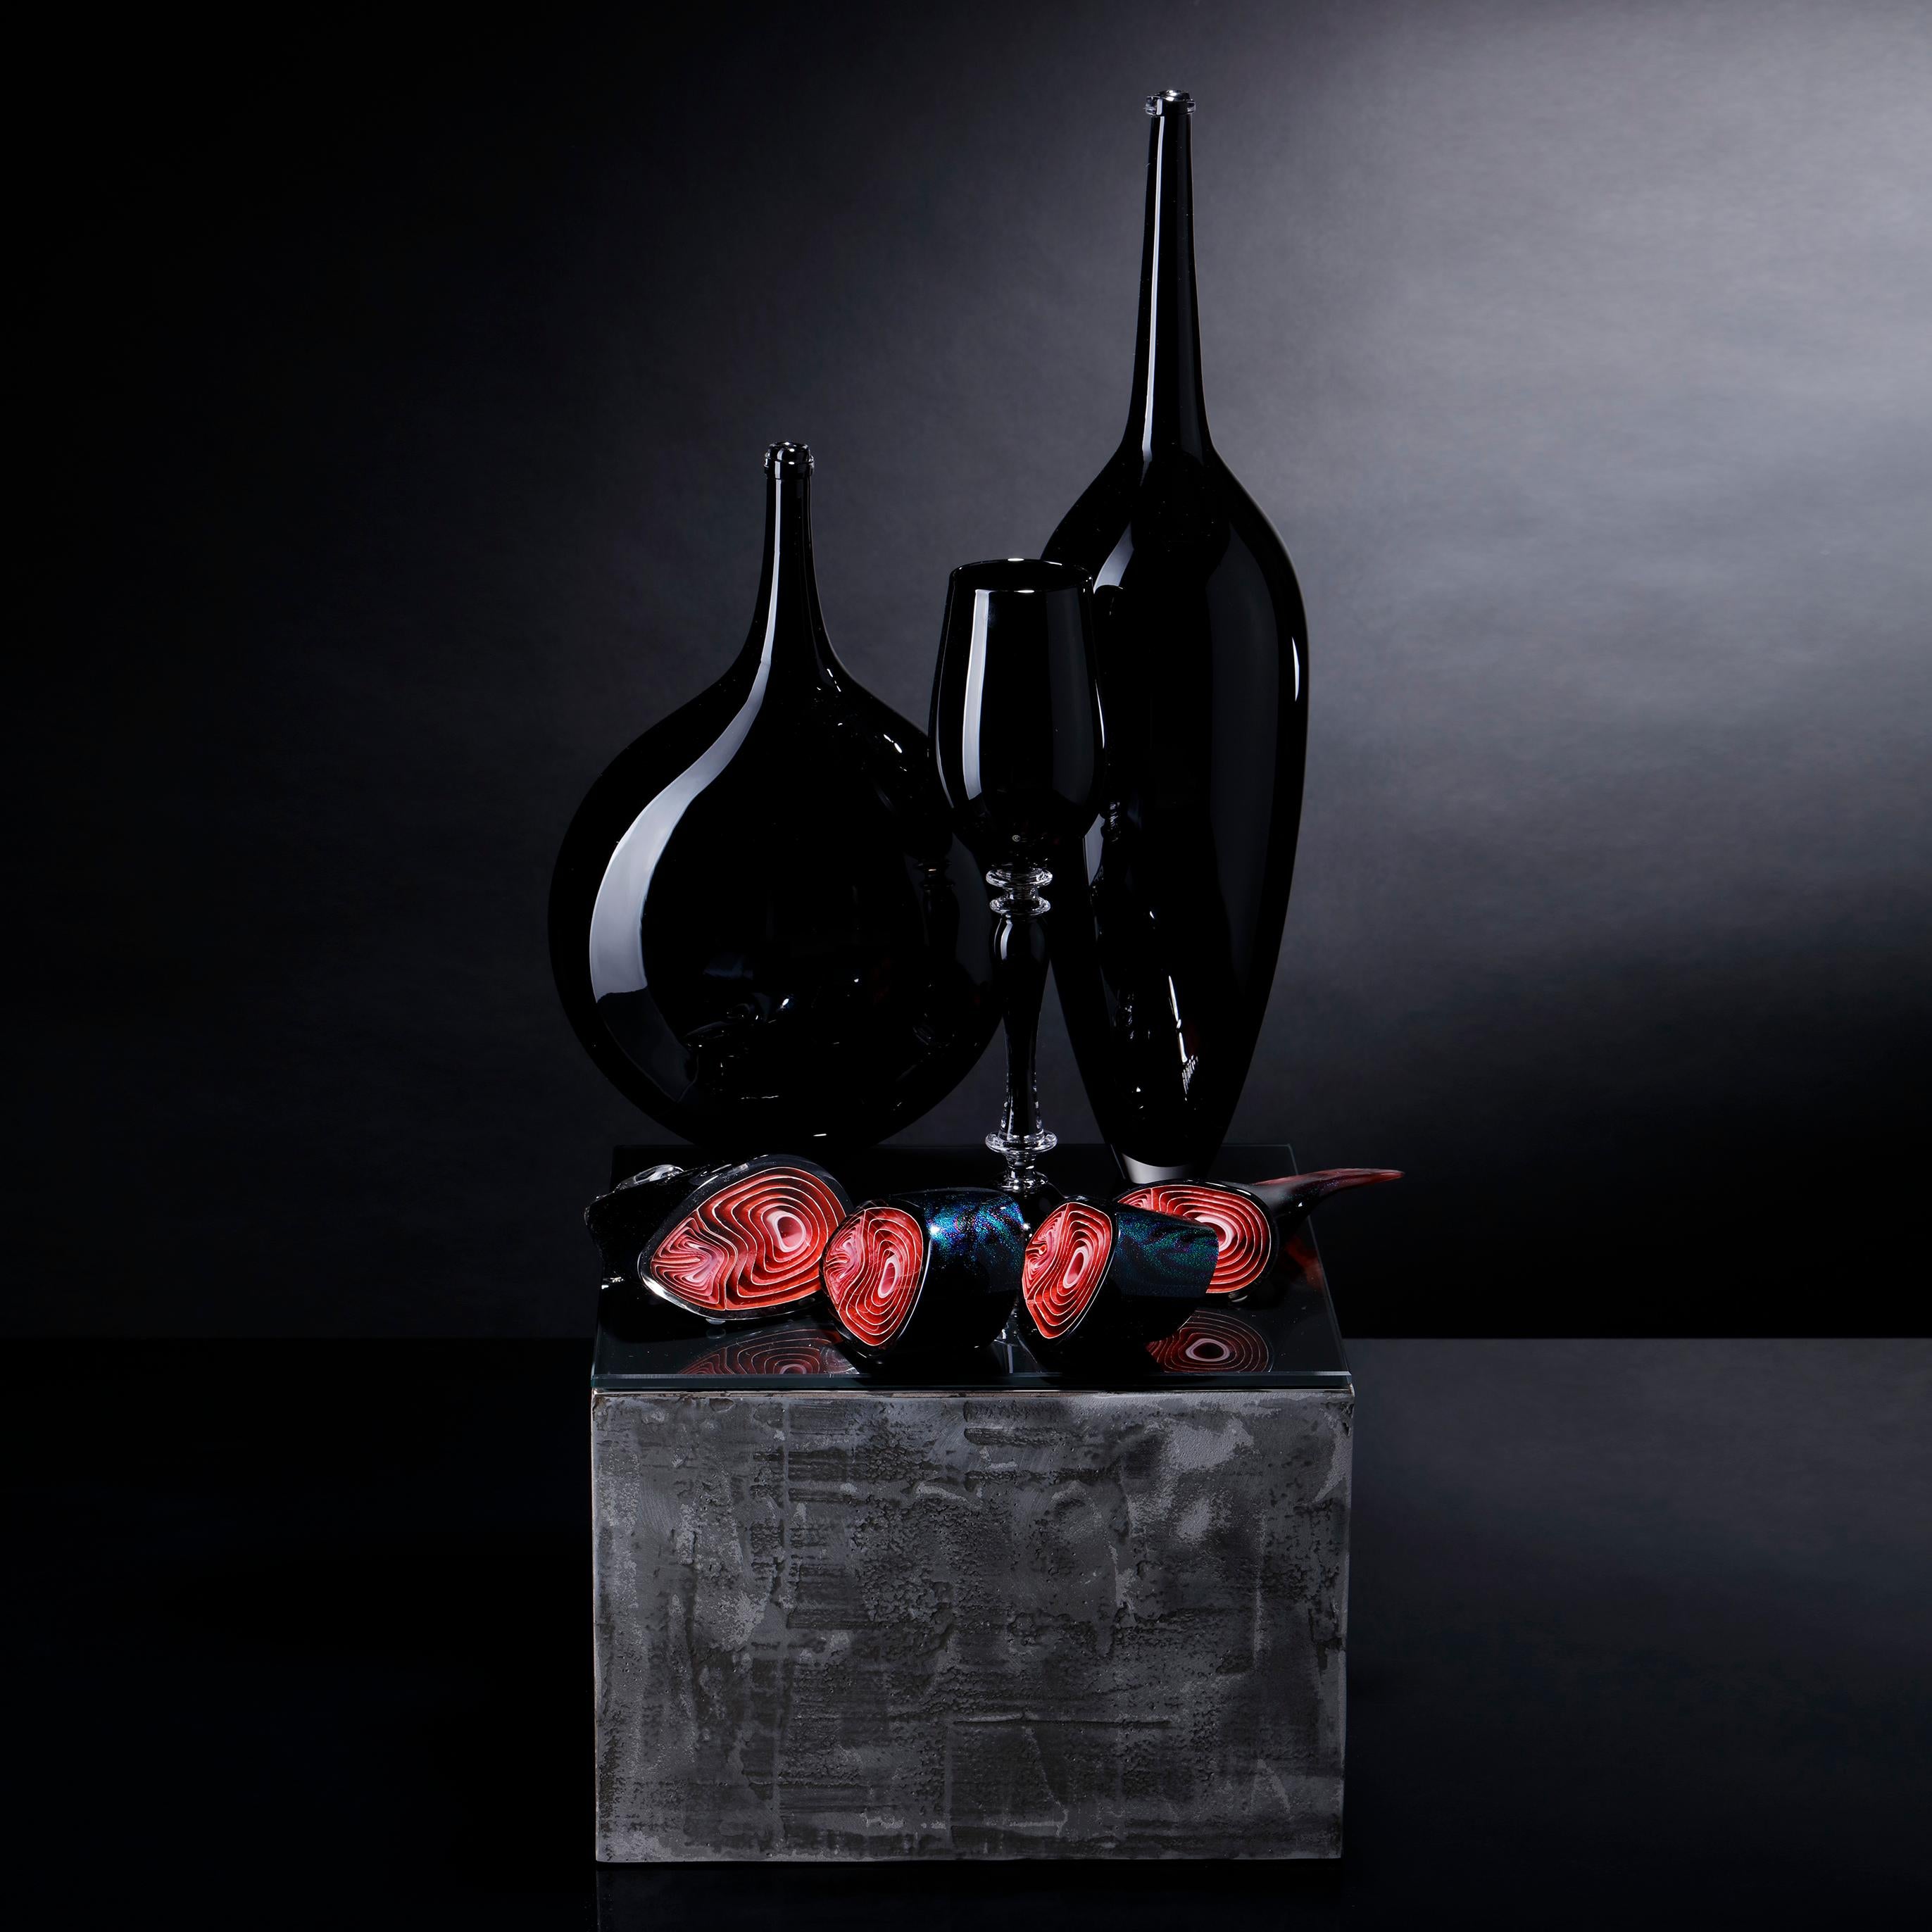 British Still Life with Fish, a Black and Red Glass Still Life Art Work by Elliot Walker